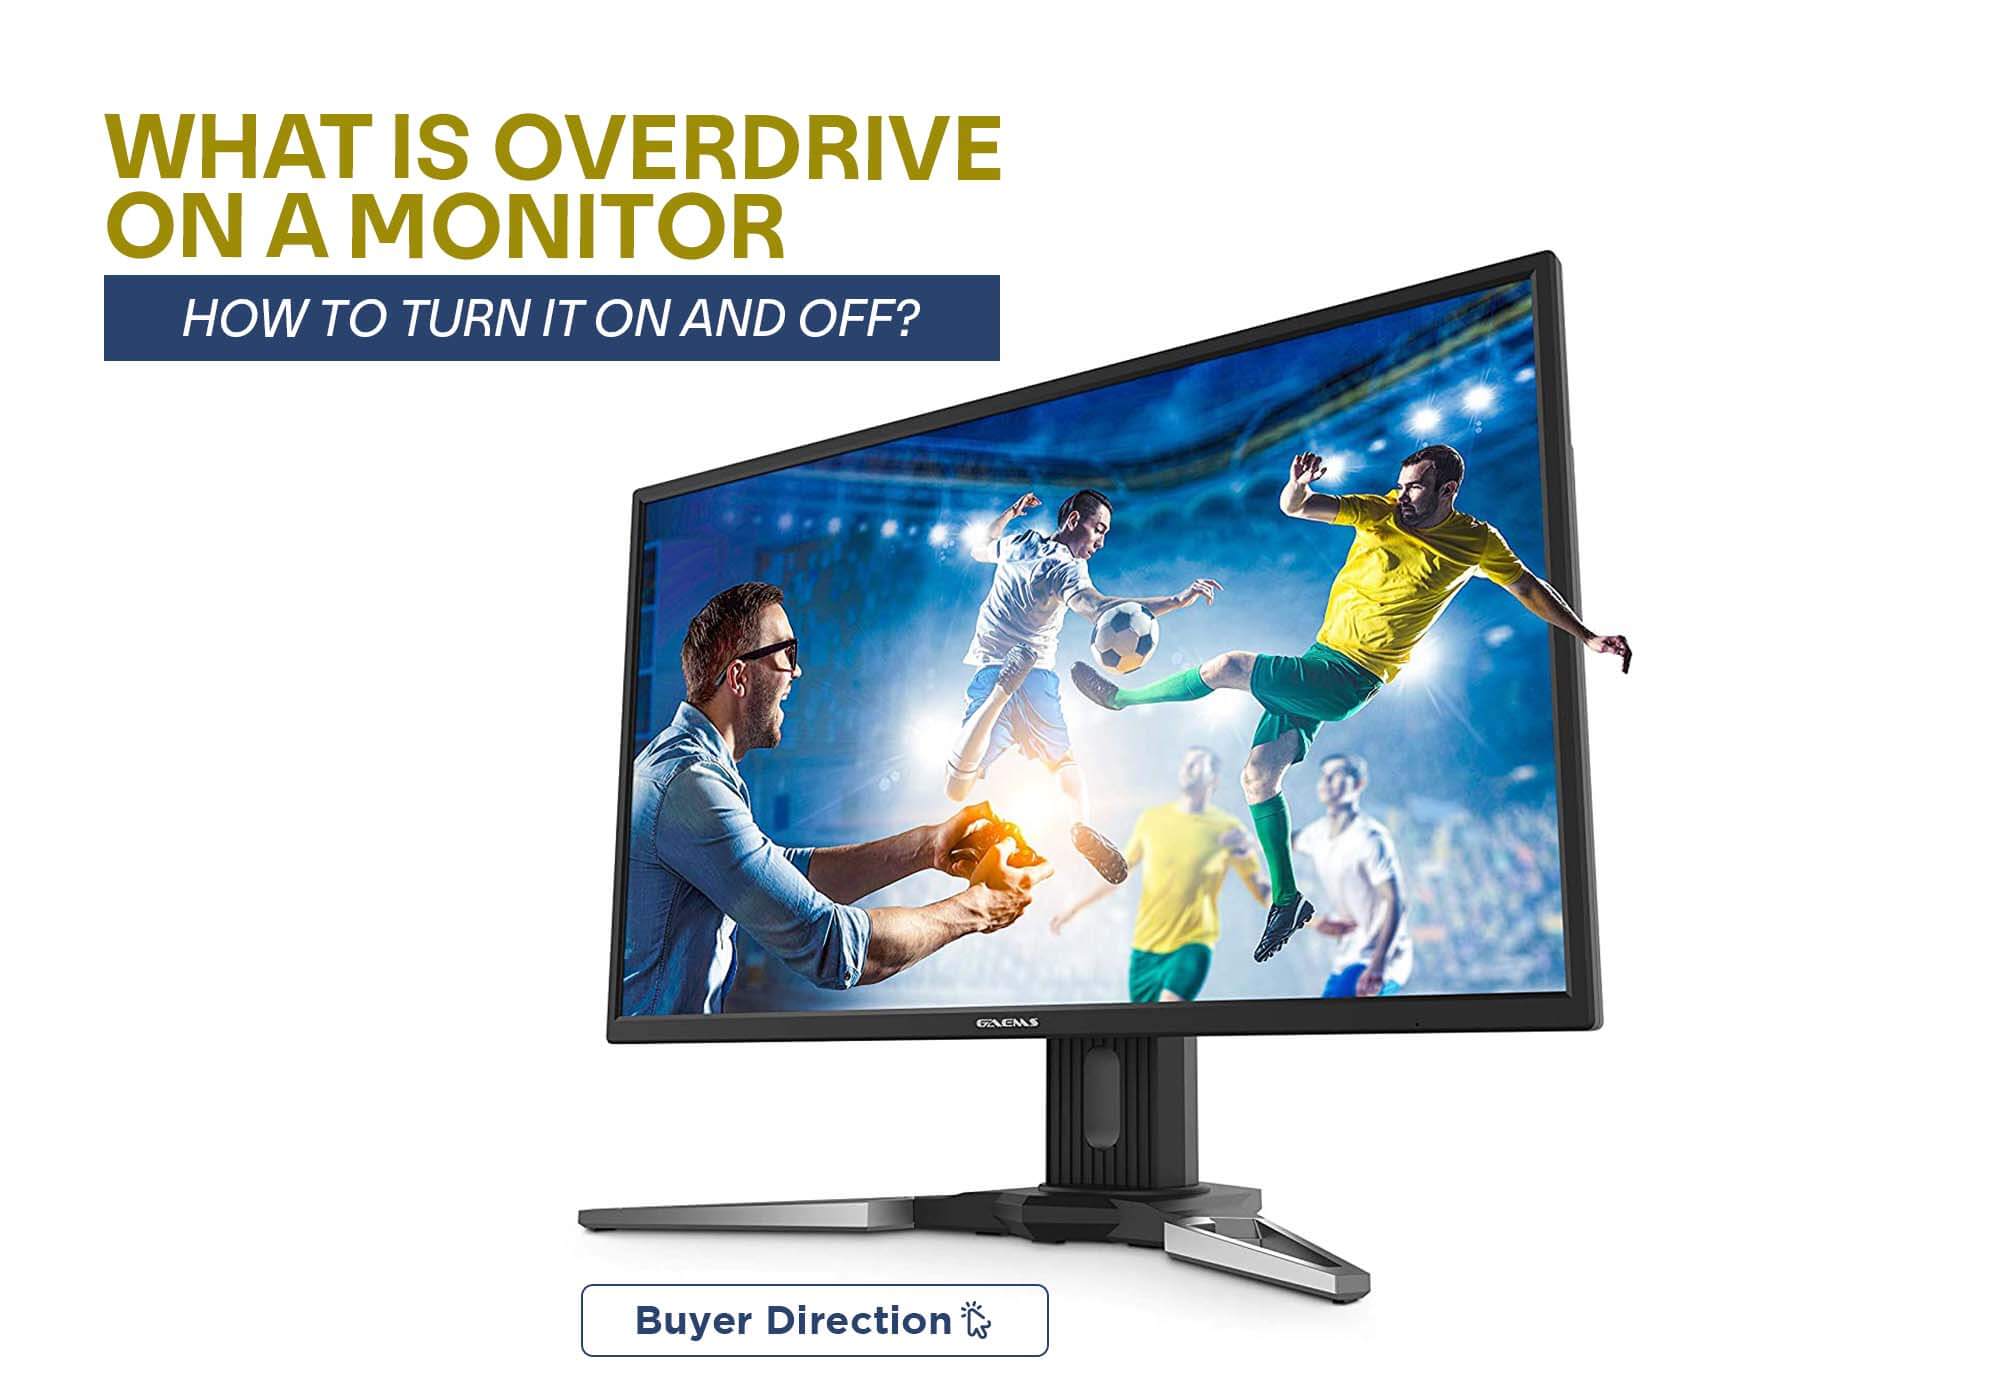 What is Overdrive on a Monitor and How to turn it on and off?